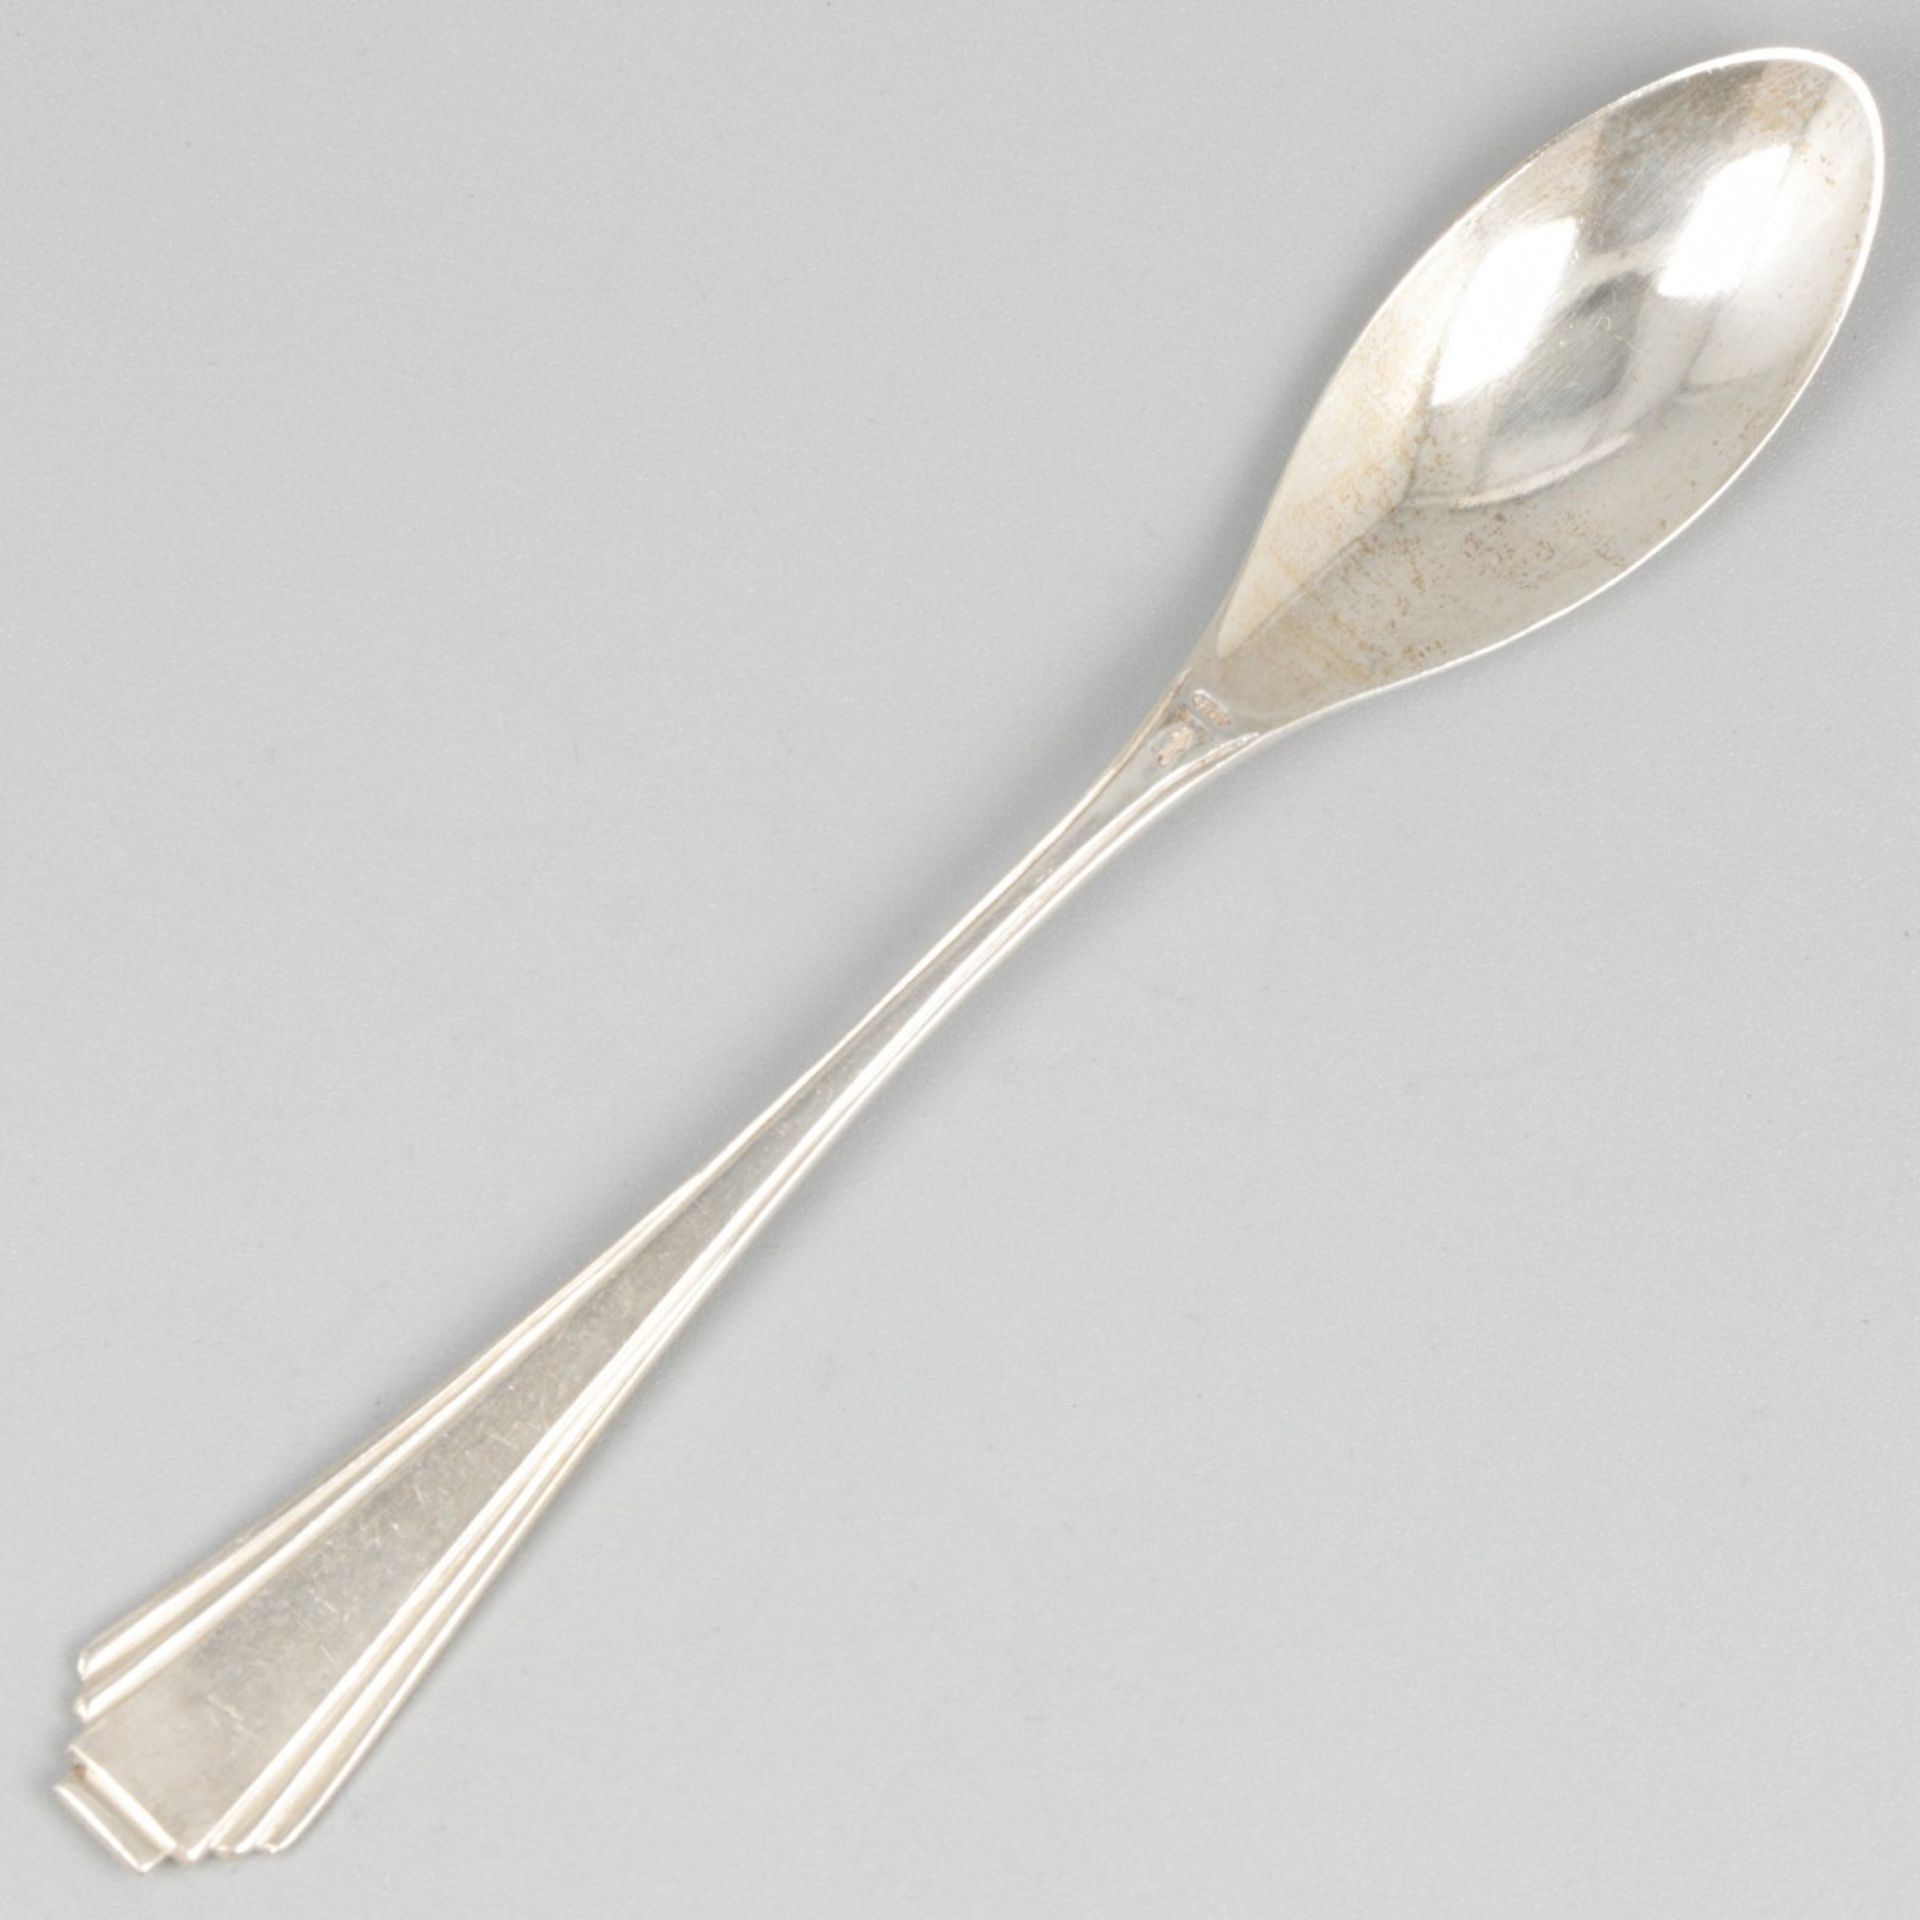 12-piece set silver coffee spoons. - Image 4 of 8